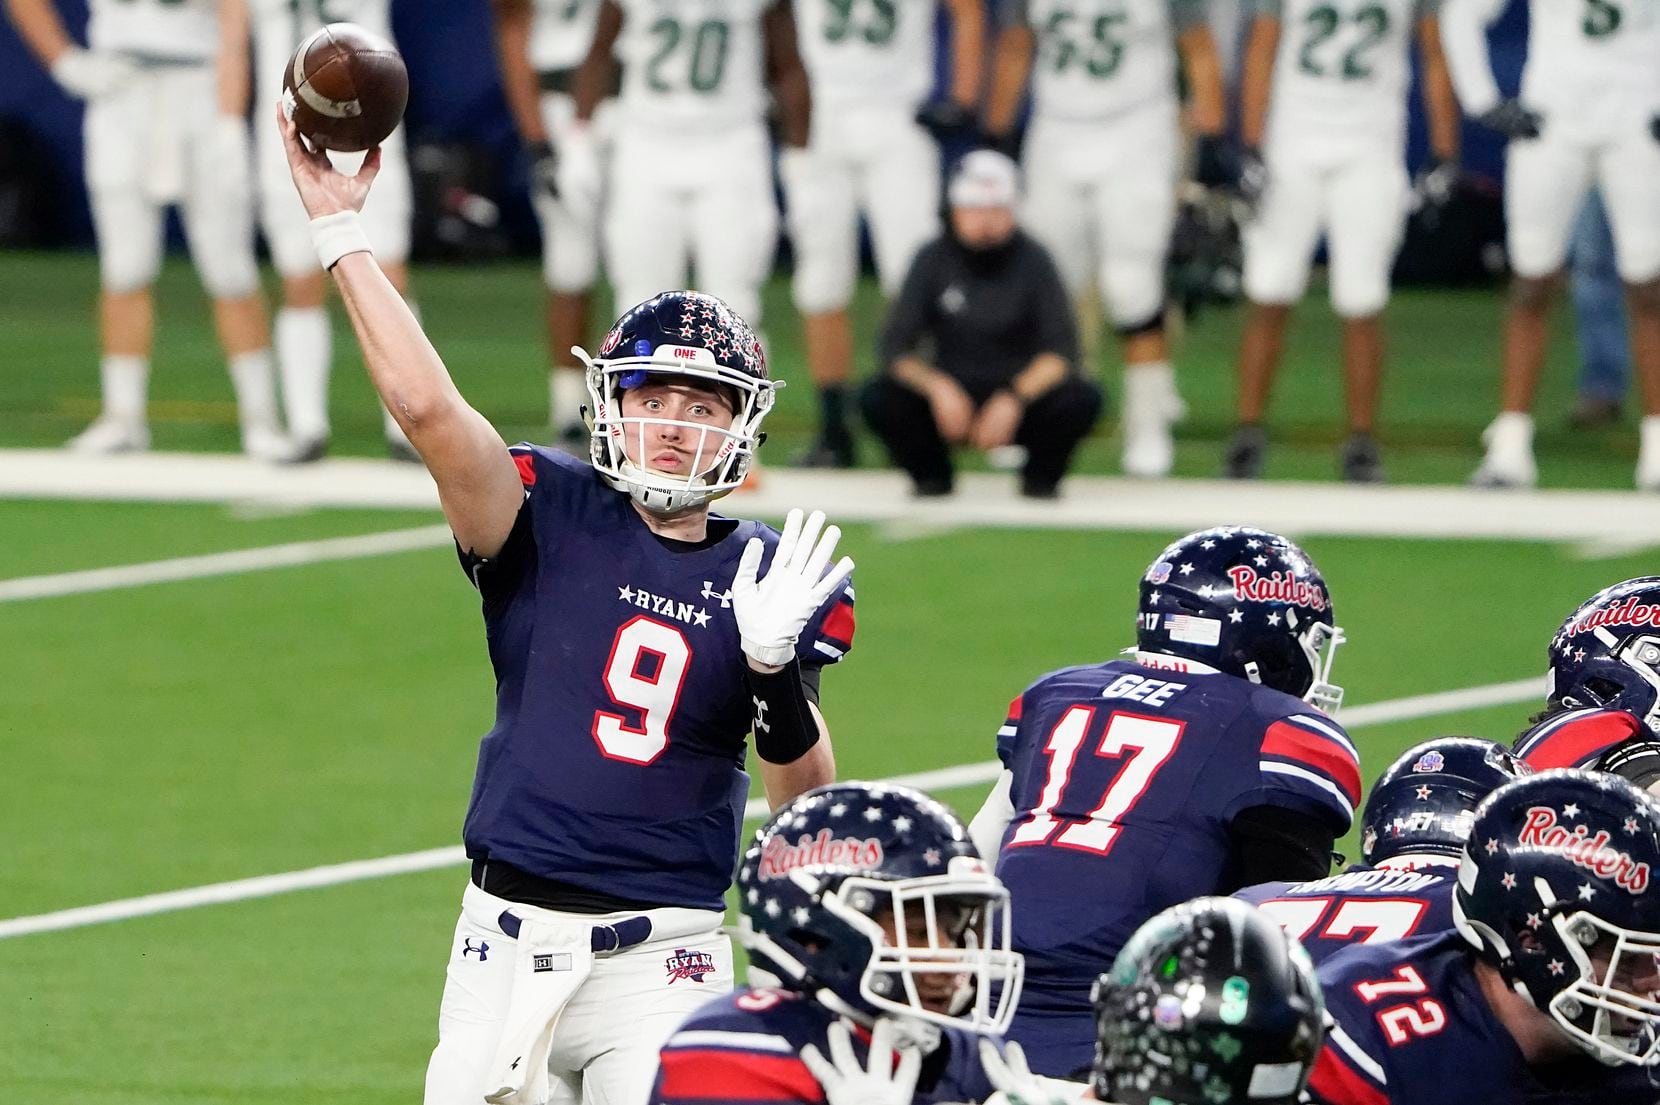 Denton Ryan quarterback Seth Henigan (9) throws a touchdown pass to Ja'Tavion Sanders during the second half of the Class 5A Division I state football championship game against Cedar Park at AT&T Stadium on Friday, Jan. 15, 2021, in Arlington, Texas. Ryan won the game 59-14. (Smiley N. Pool/The Dallas Morning News)